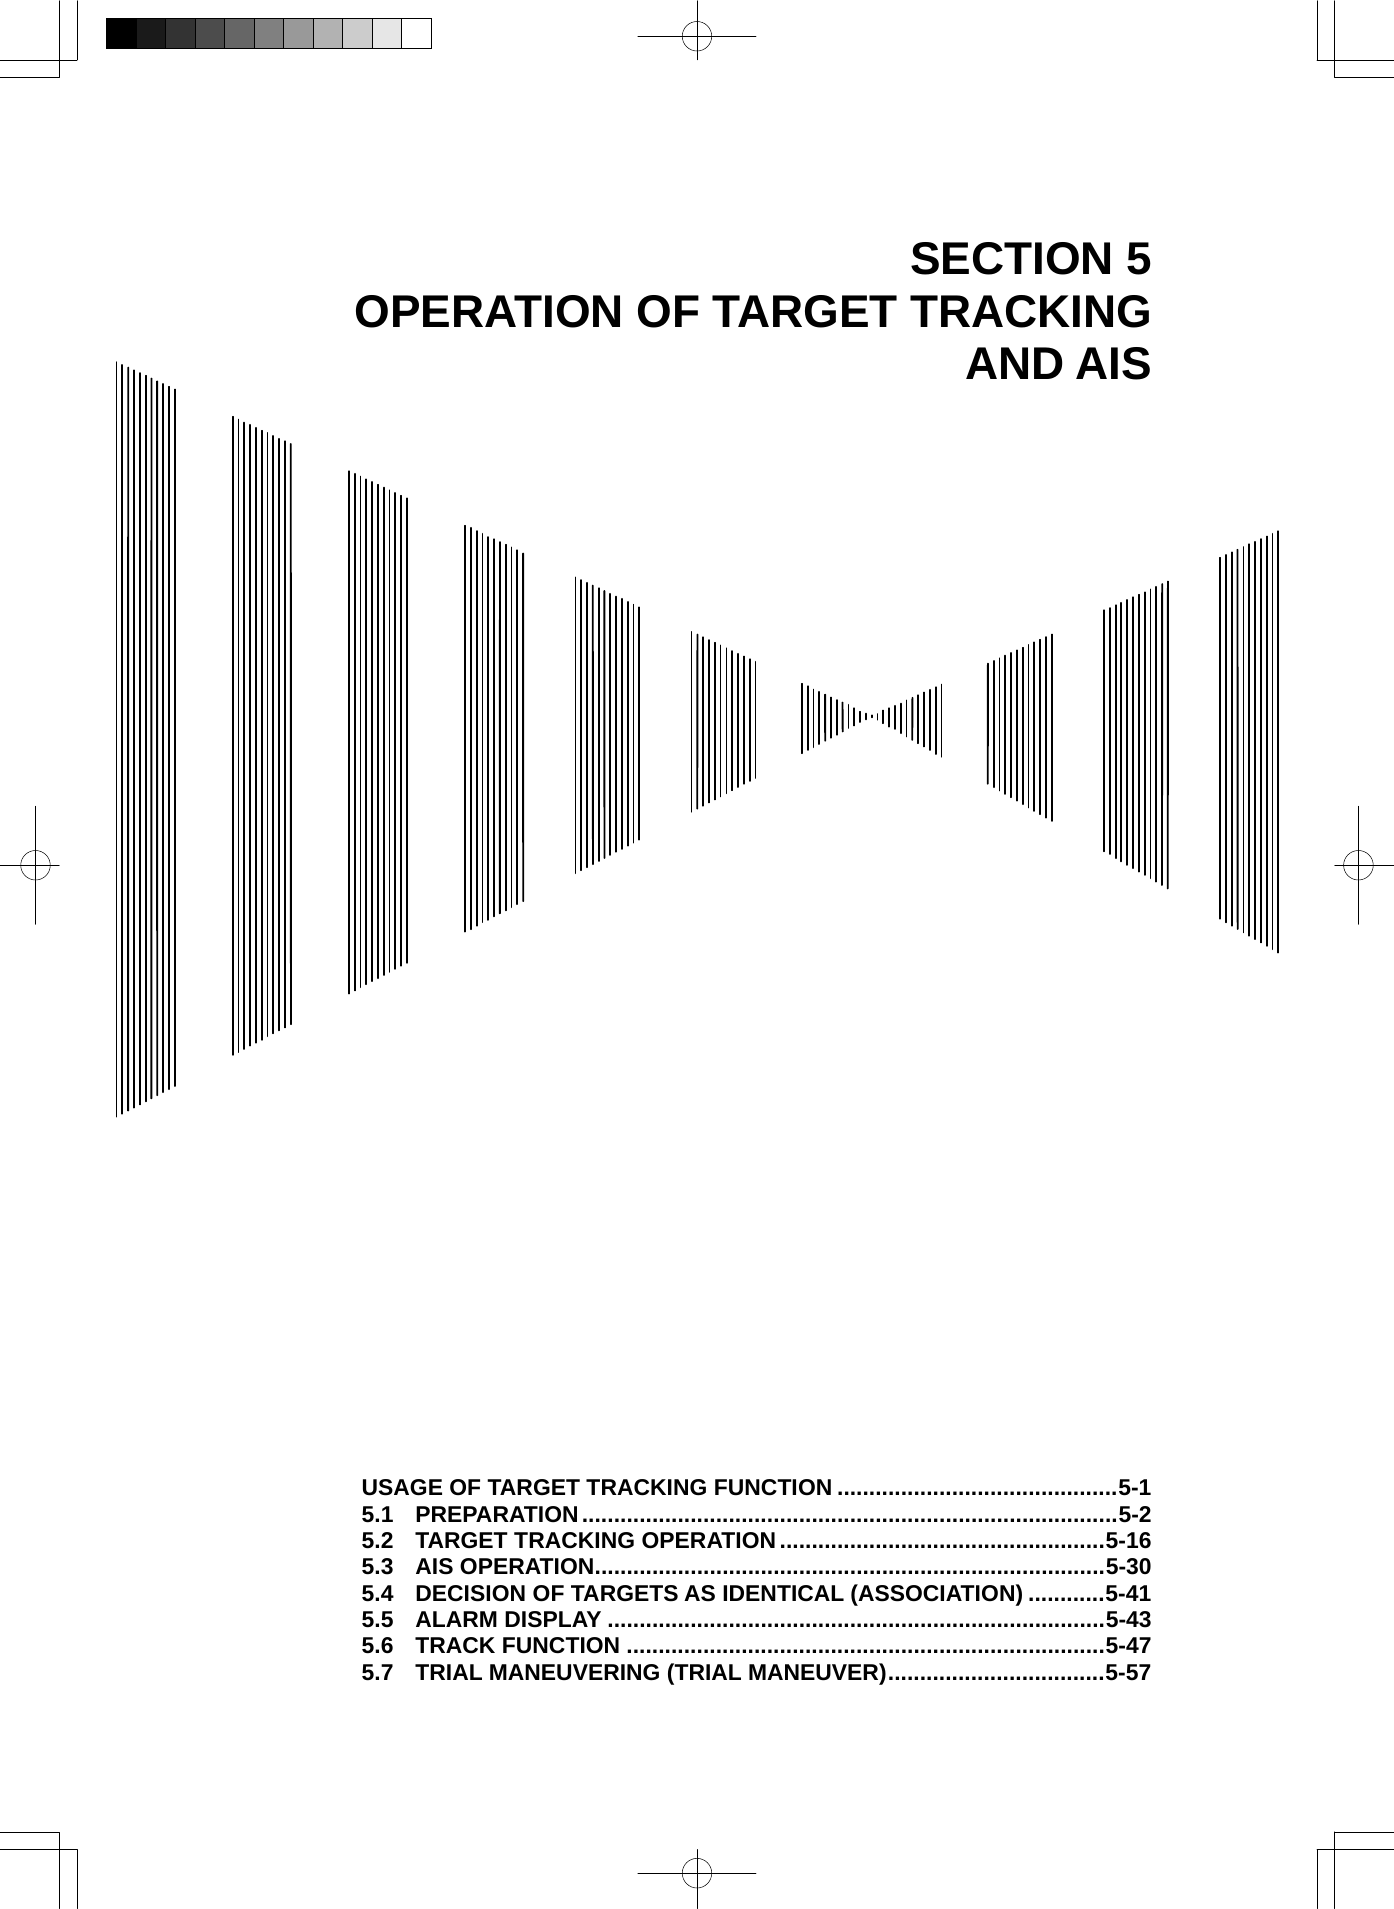   SECTION 5 OPERATION OF TARGET TRACKING AND AIS                                          USAGE OF TARGET TRACKING FUNCTION ............................................5-1 5.1 PREPARATION....................................................................................5-2 5.2 TARGET TRACKING OPERATION...................................................5-16 5.3 AIS OPERATION................................................................................5-30 5.4 DECISION OF TARGETS AS IDENTICAL (ASSOCIATION) ............5-41 5.5 ALARM DISPLAY ..............................................................................5-43 5.6 TRACK FUNCTION ...........................................................................5-47 5.7 TRIAL MANEUVERING (TRIAL MANEUVER)..................................5-57 